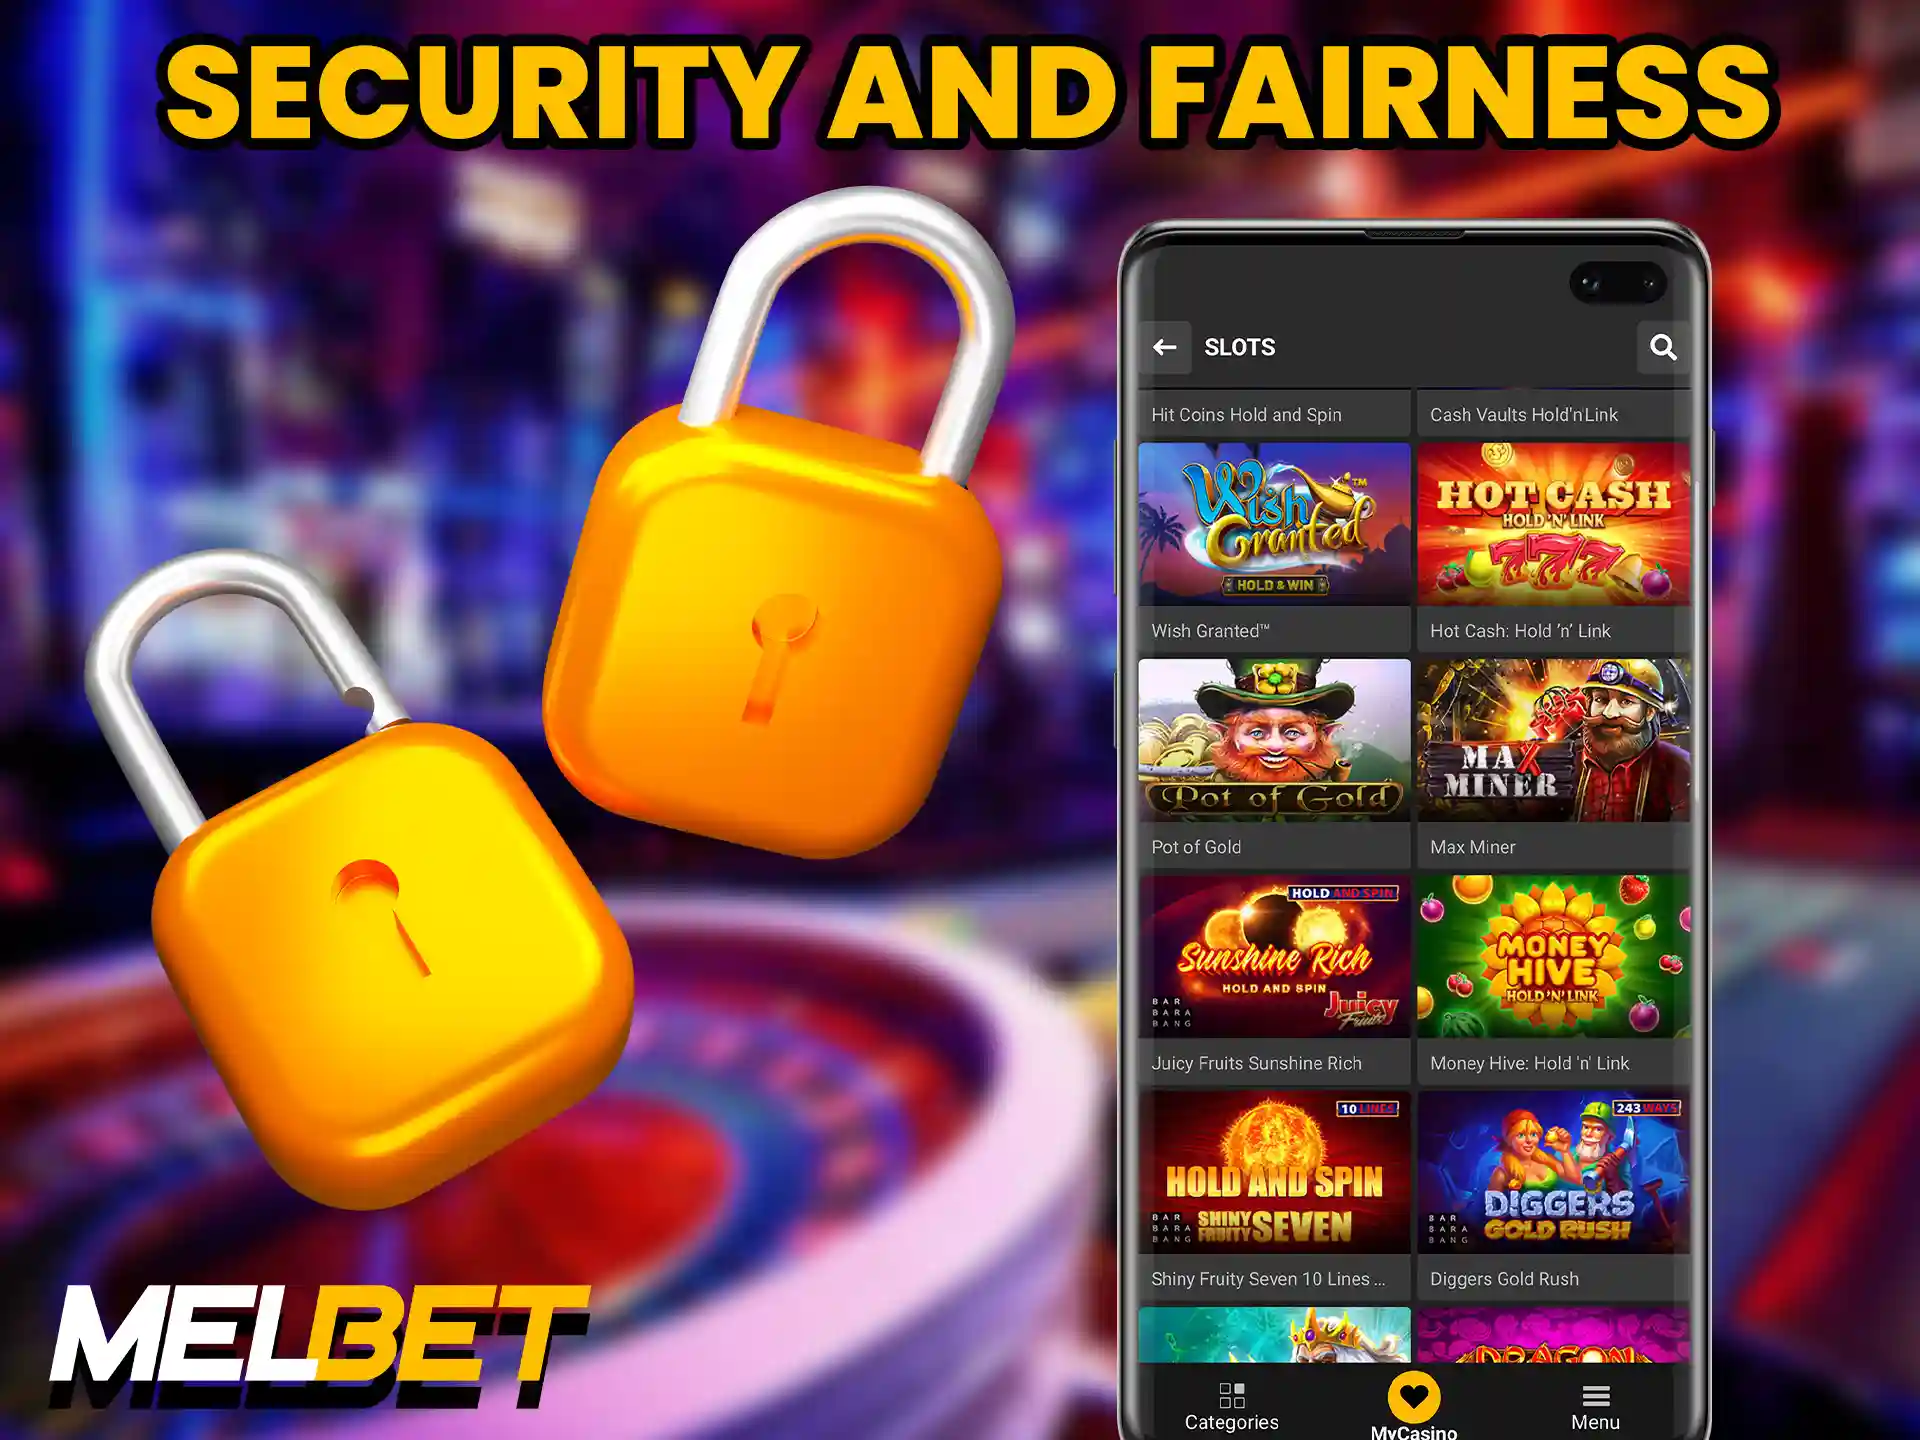 The Melbet website is fully encrypted against hacker attacks.